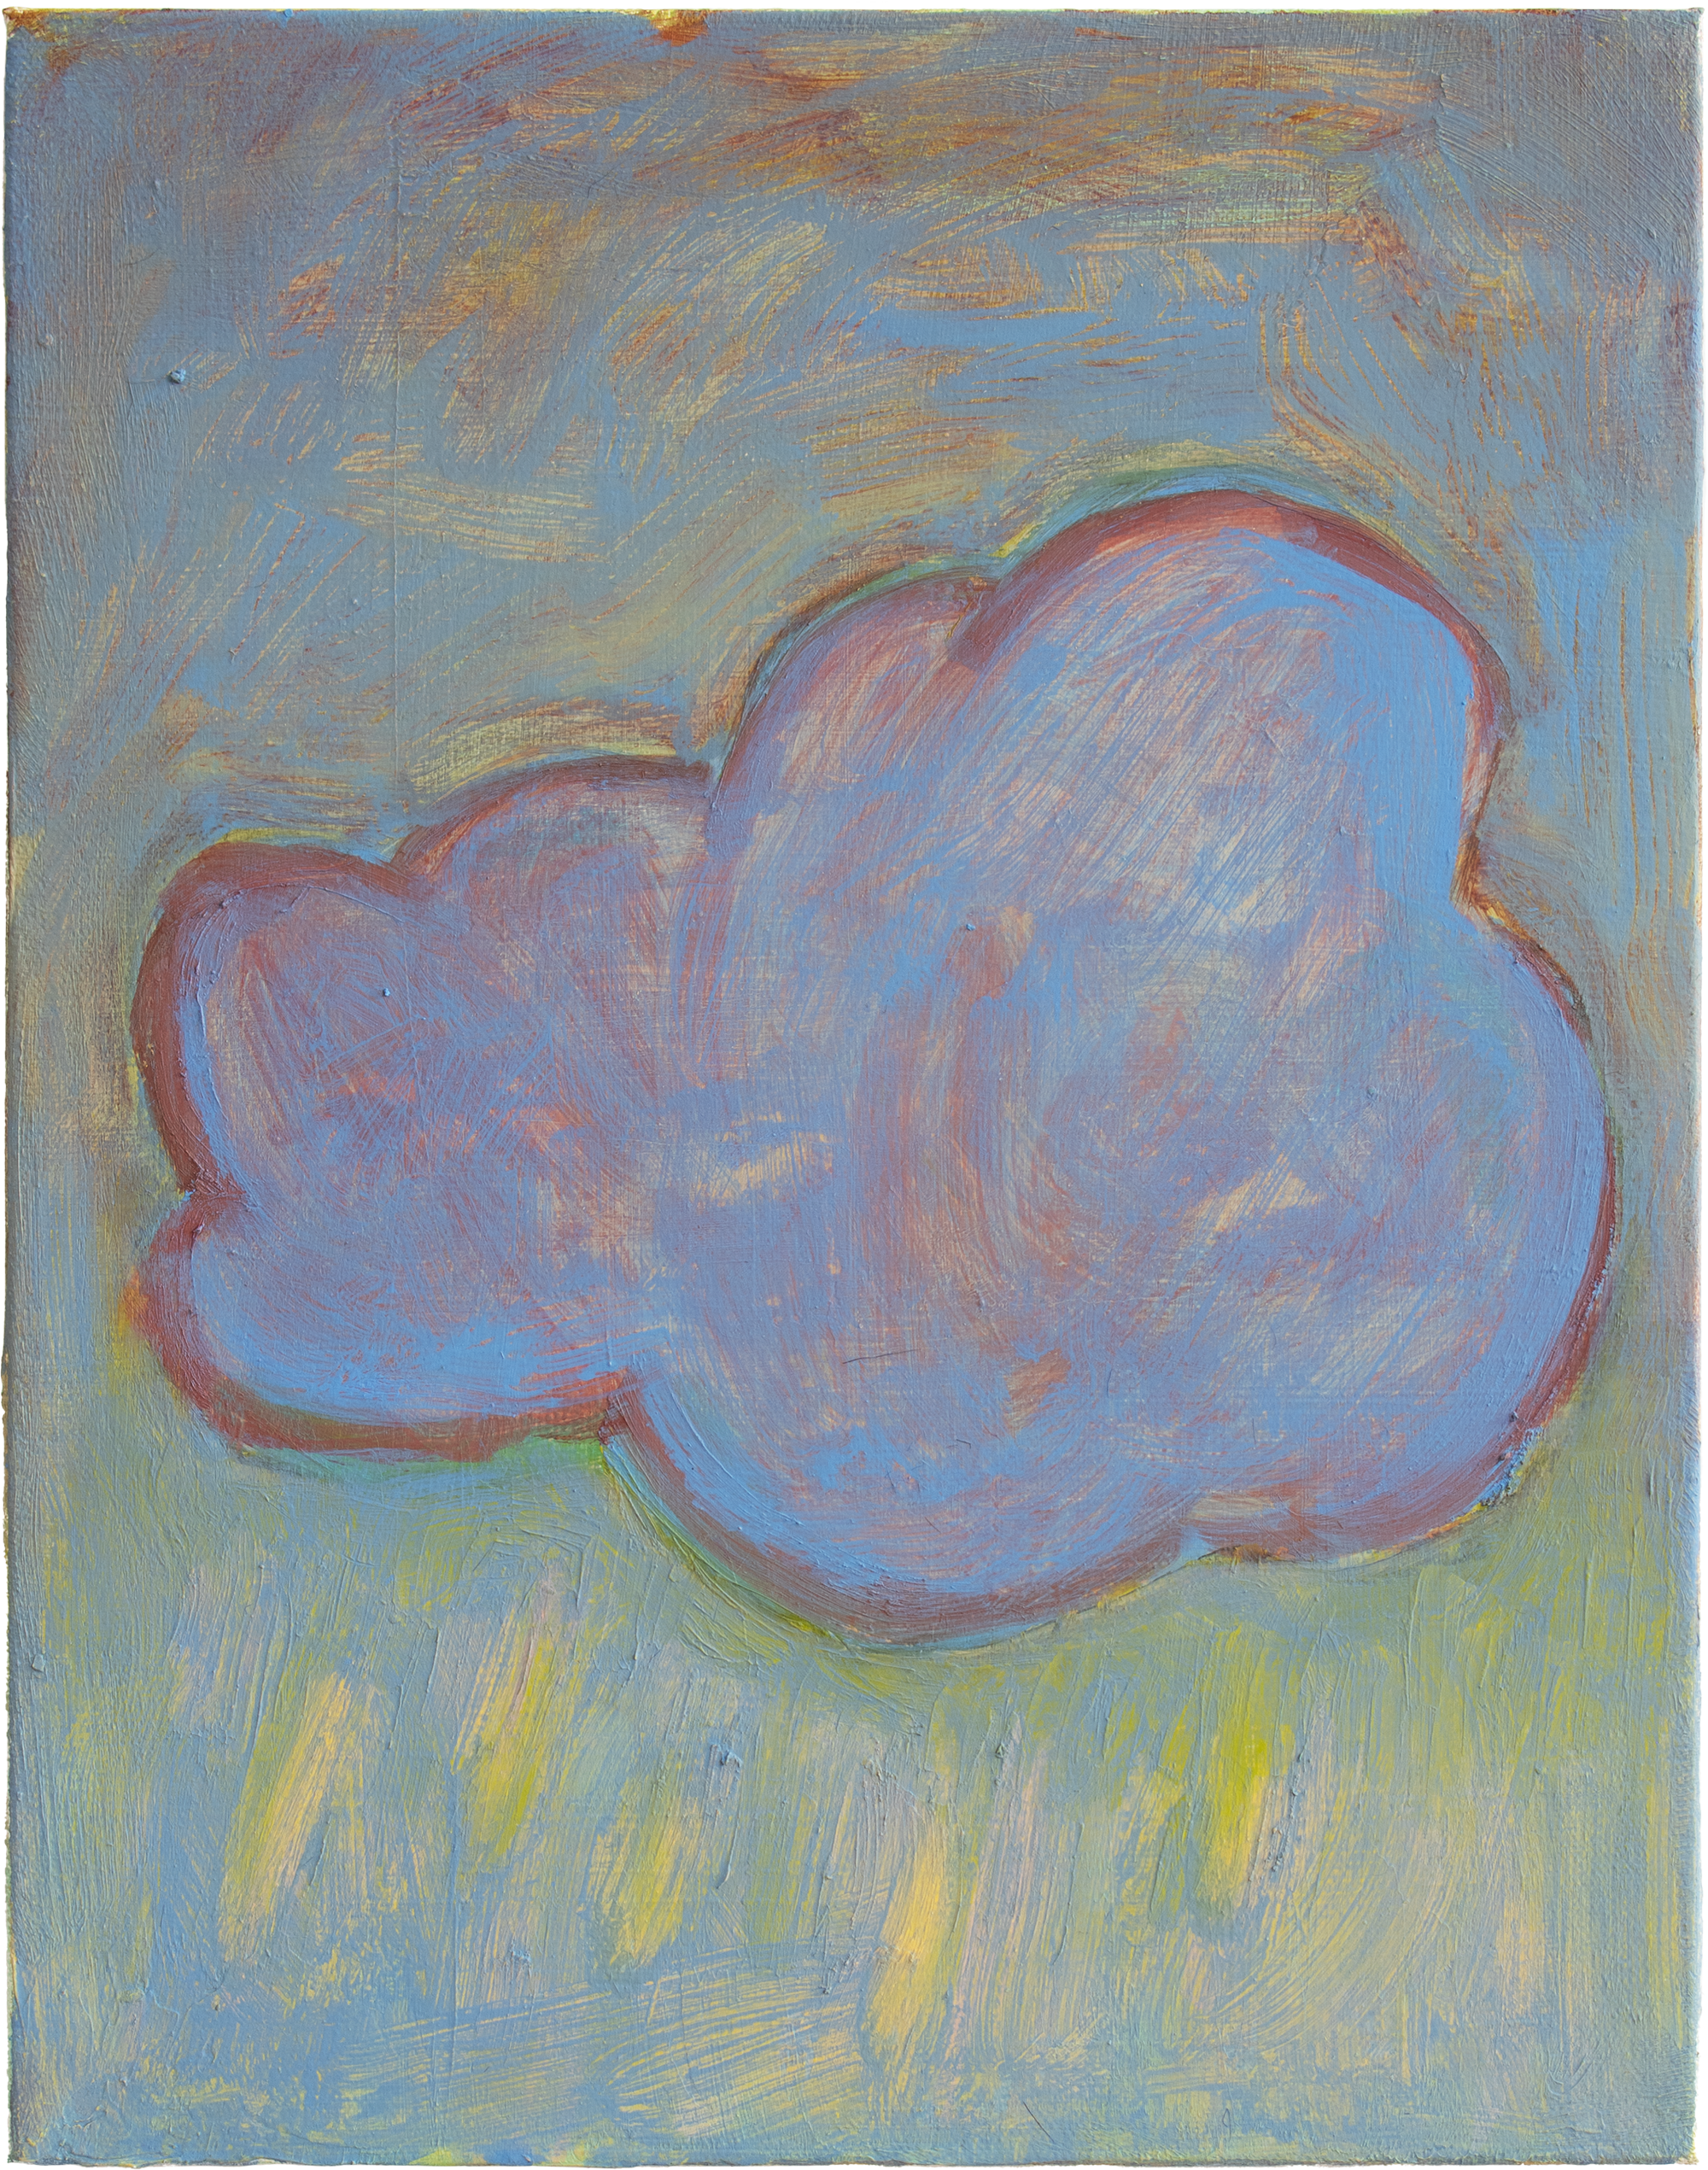     Blue Cloud                                                                                                        oil on canvas, 11 x 14 in.     